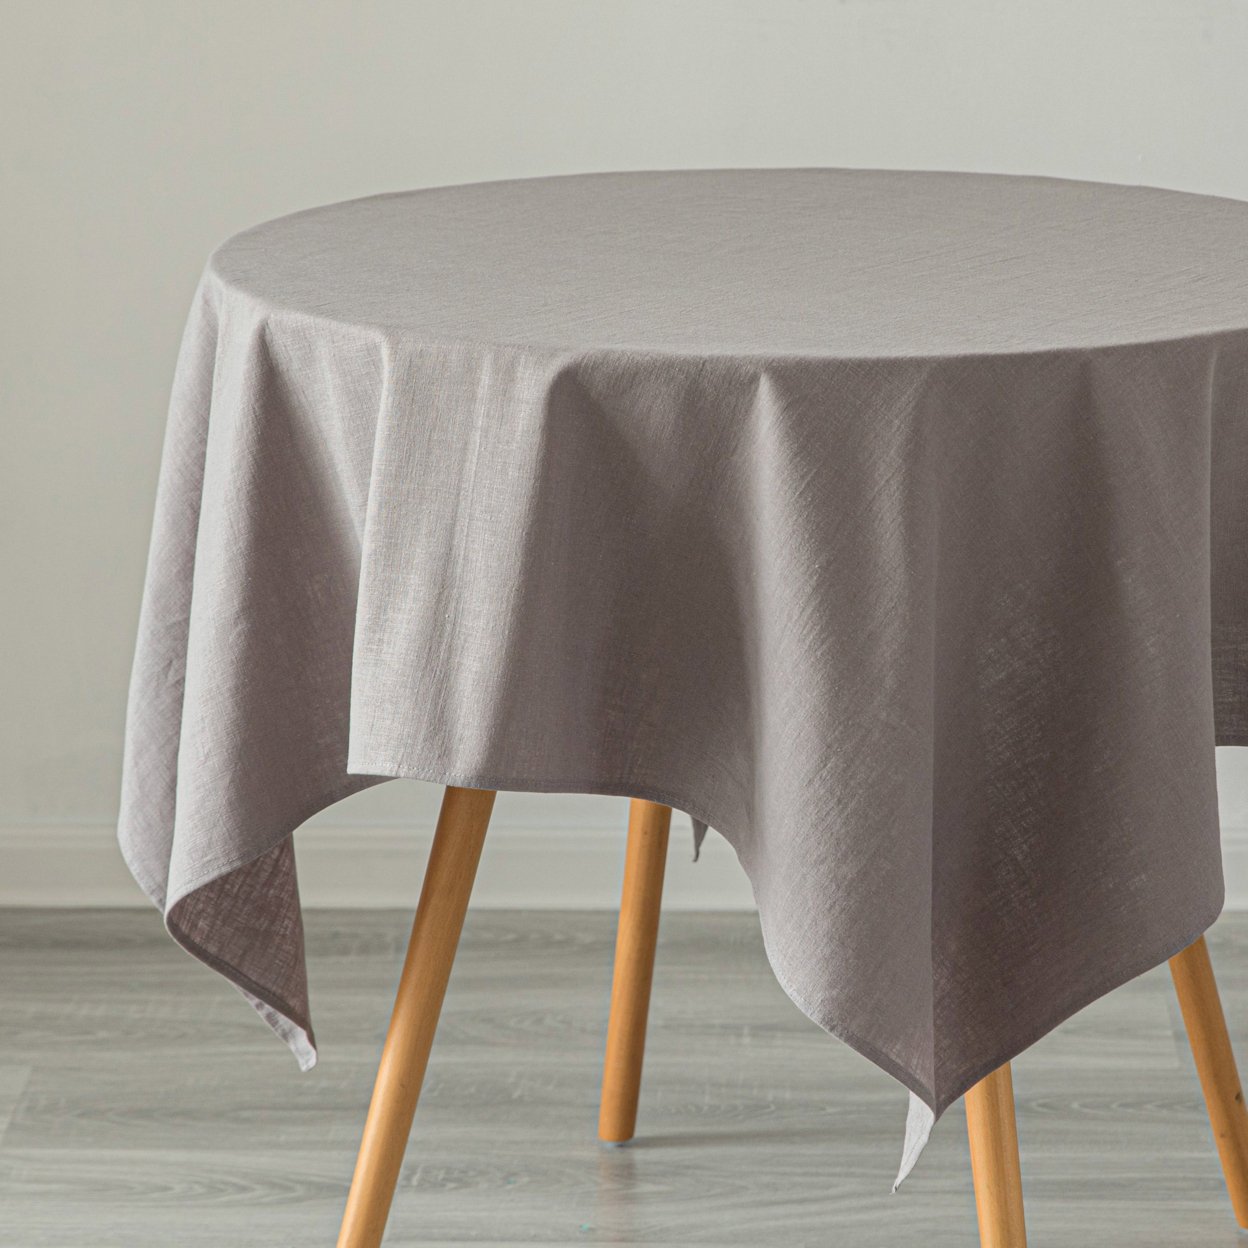 Deerlux 100 Percent Pure Linen Washable Tablecloth Solid Color - 52 X 78 In. Gray